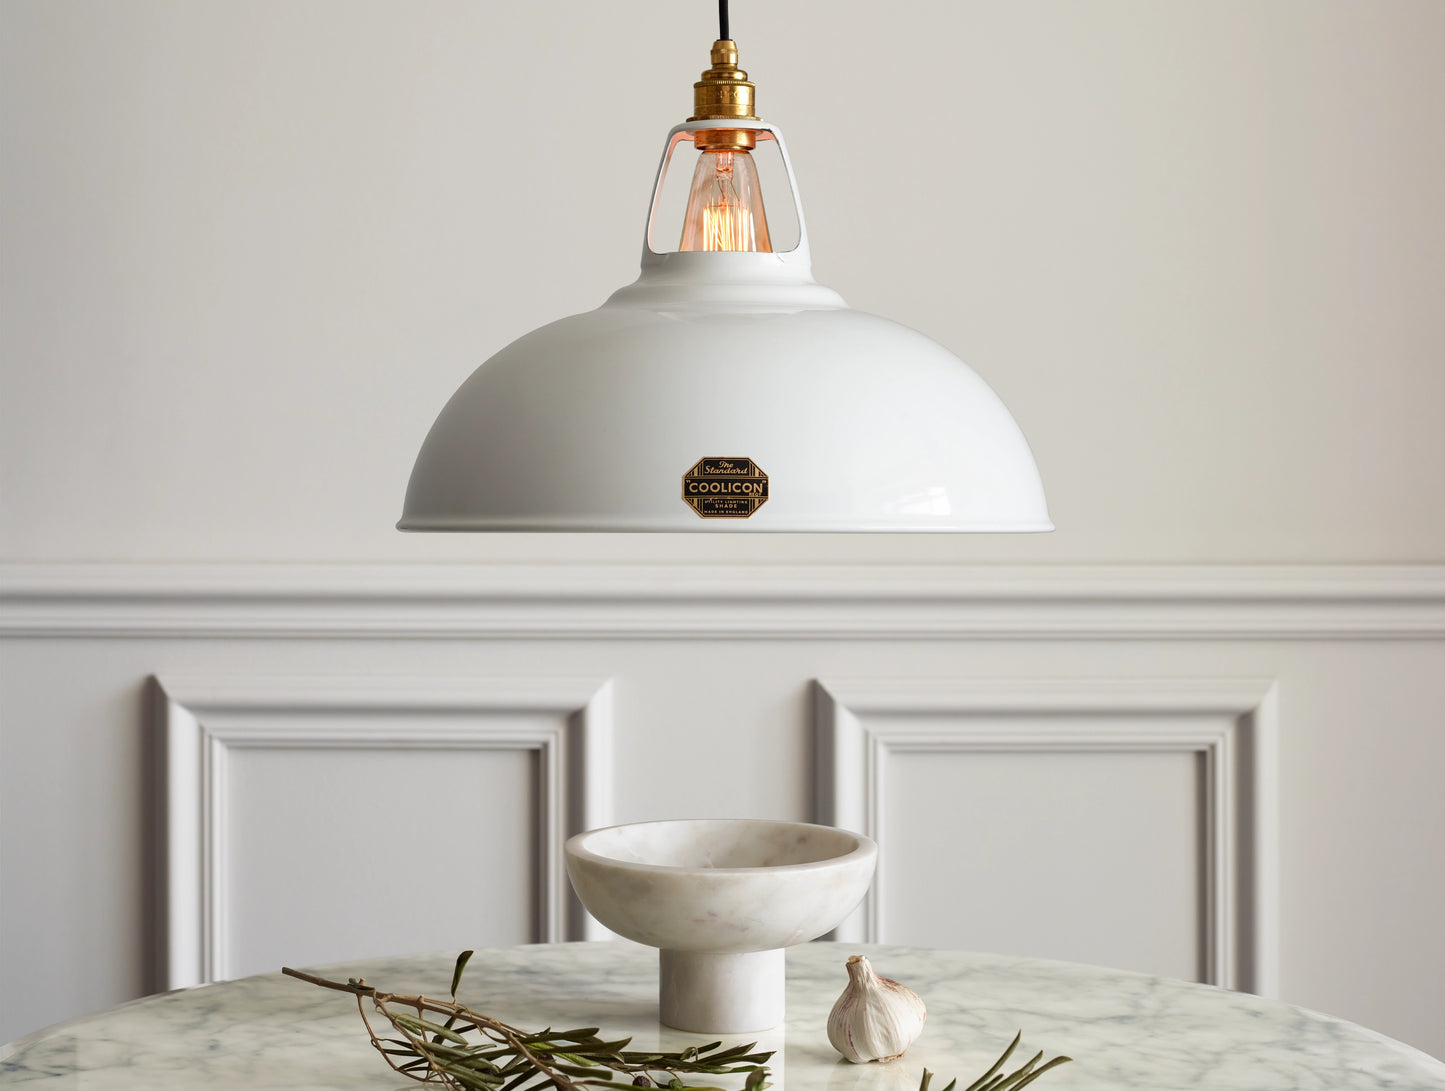 A Large Coolicon Original White lampshade hanging over a marble table. Below the shade is a marble salad bowl, a garlic bulb and a tree branch